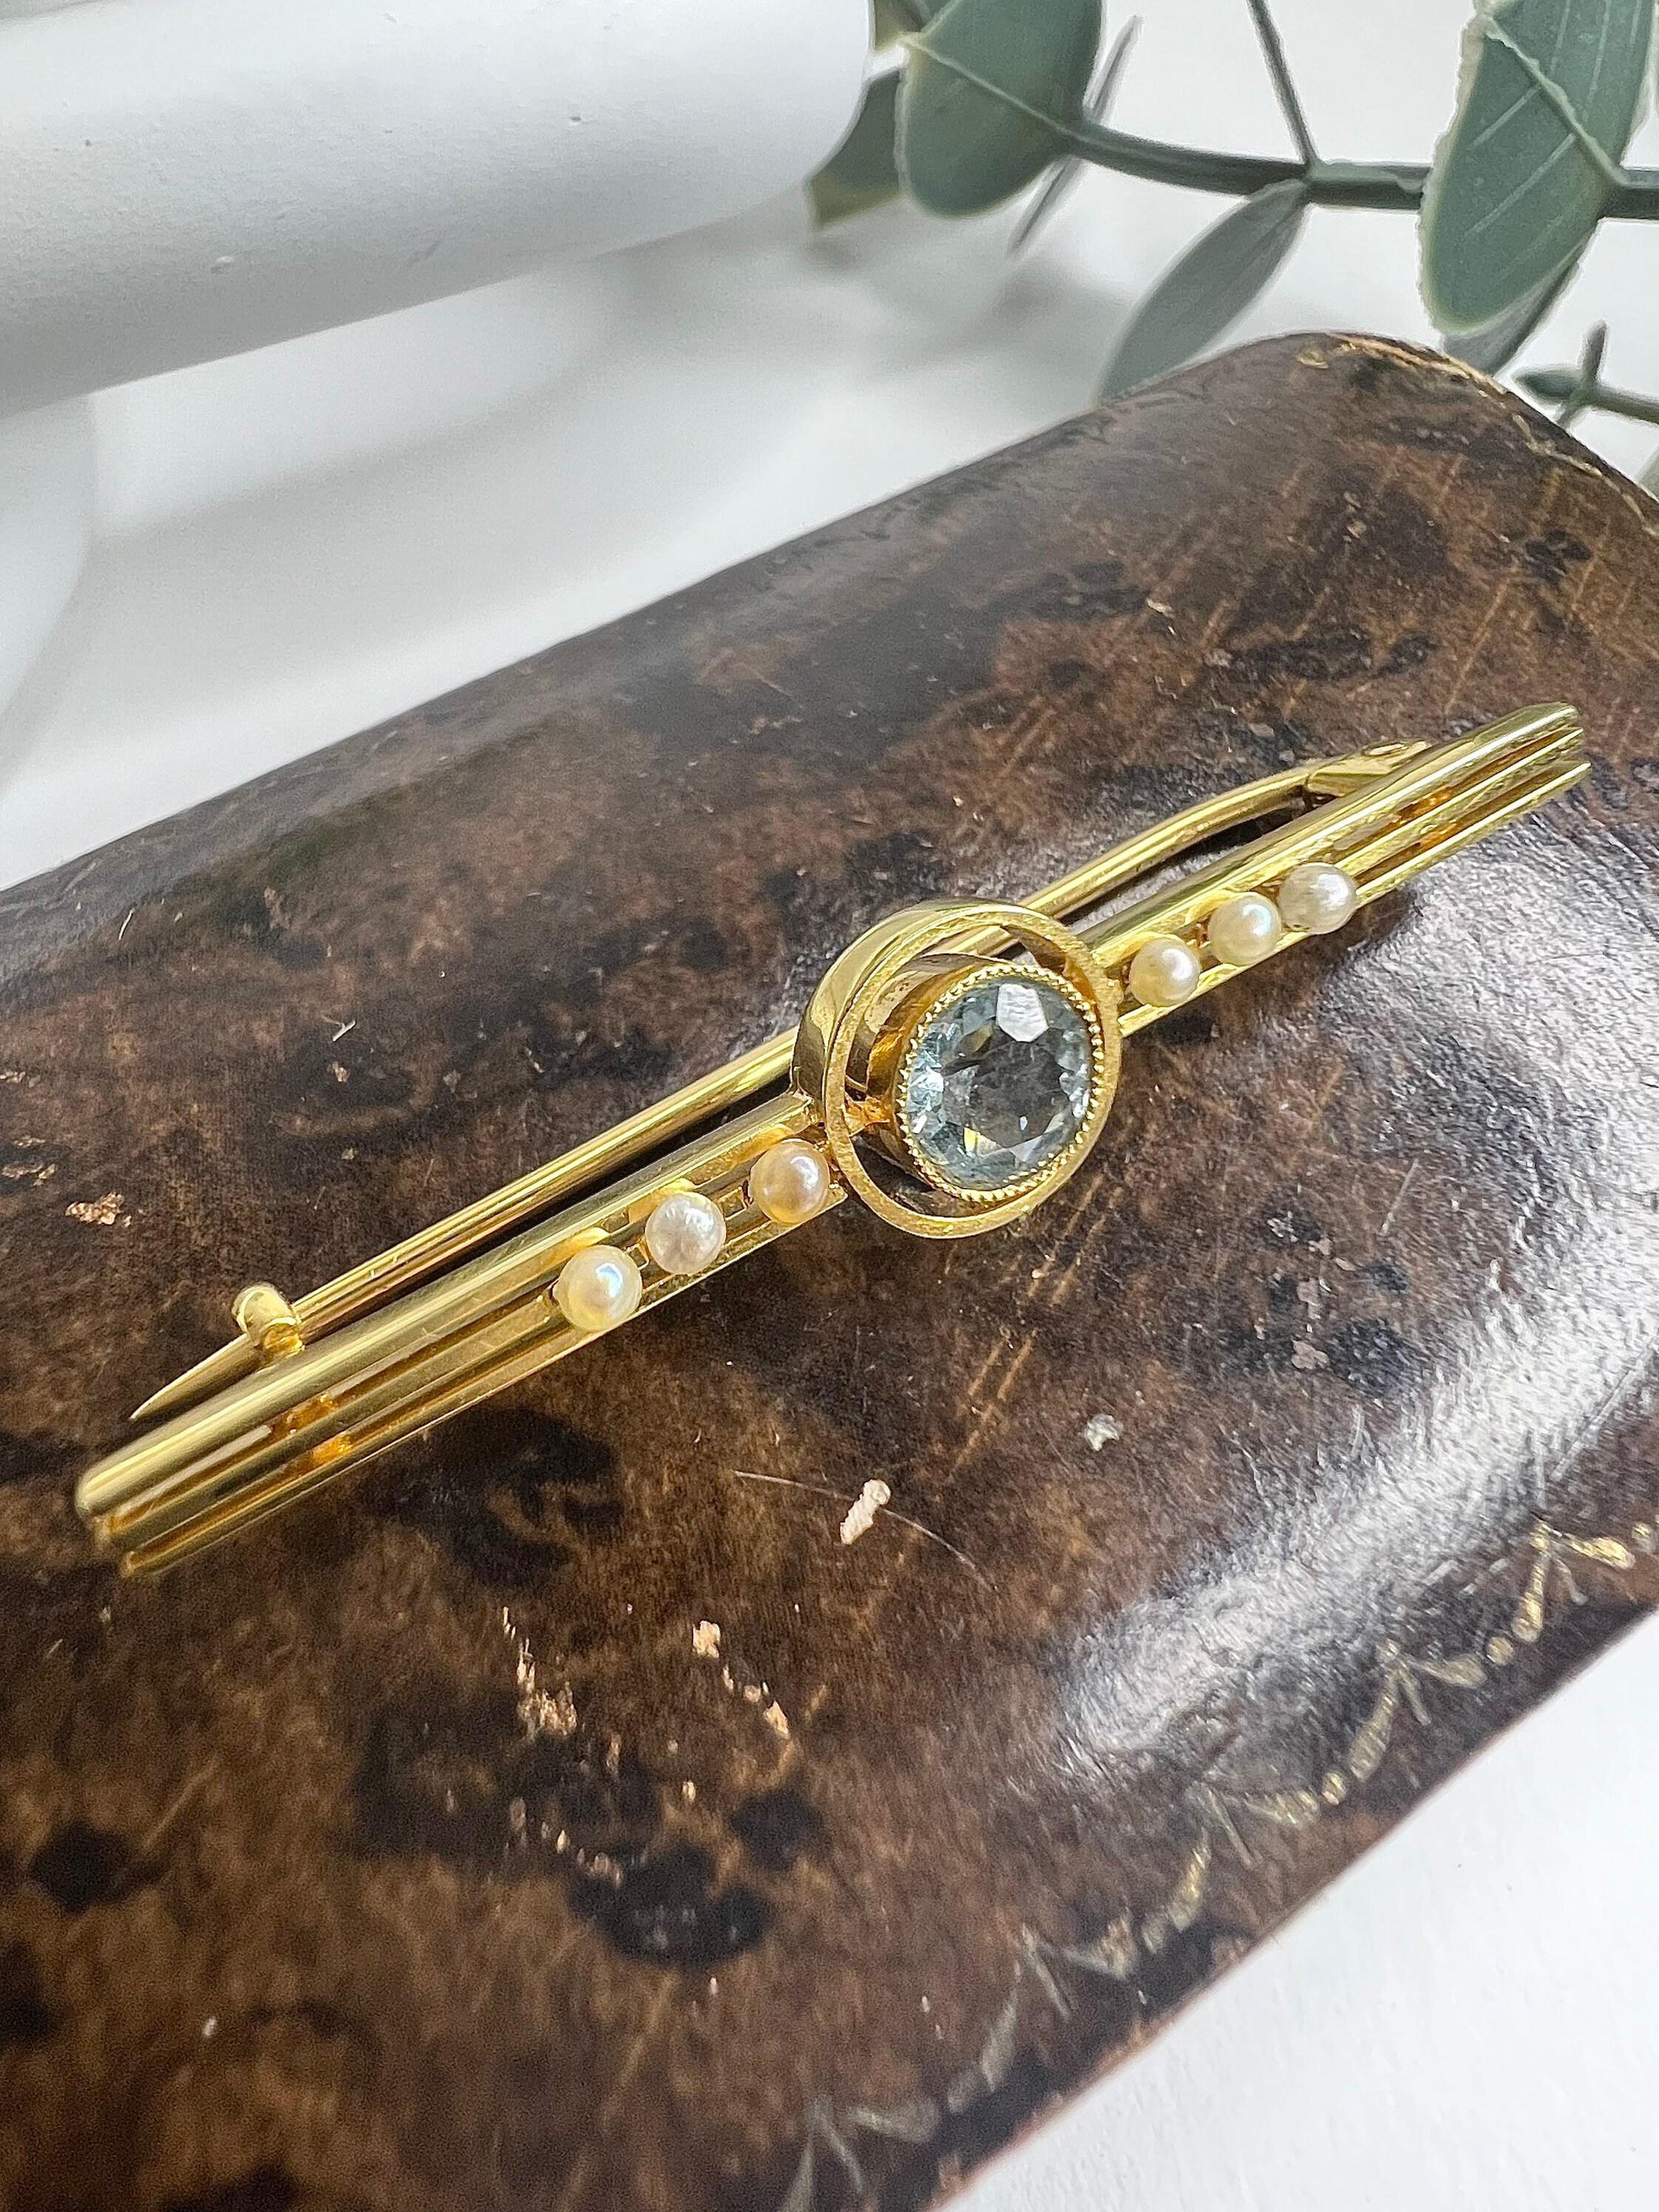 Antique Gold Brooch

15ct Gold 

Circa 1910

Beautiful Edwardian Bar Brooch. Set with a Centre Aquamarine & Three Seed Pearls Either Side. 

Measures Approx Length 44.5mm & Width Approx 8.3mm

All of our items are either Antique, Vintage or